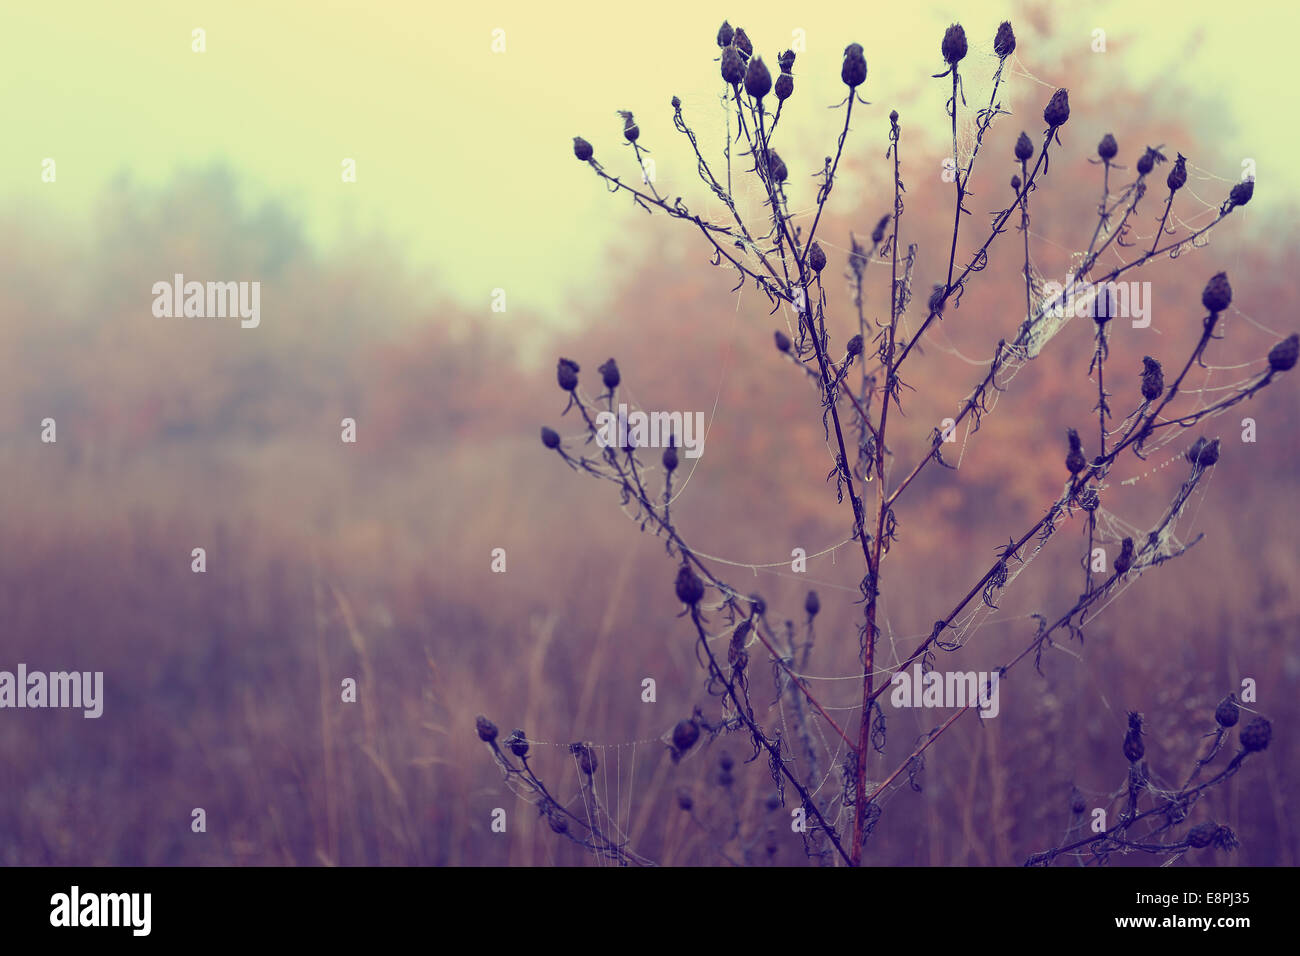 Misty morning on a rural glade Stock Photo